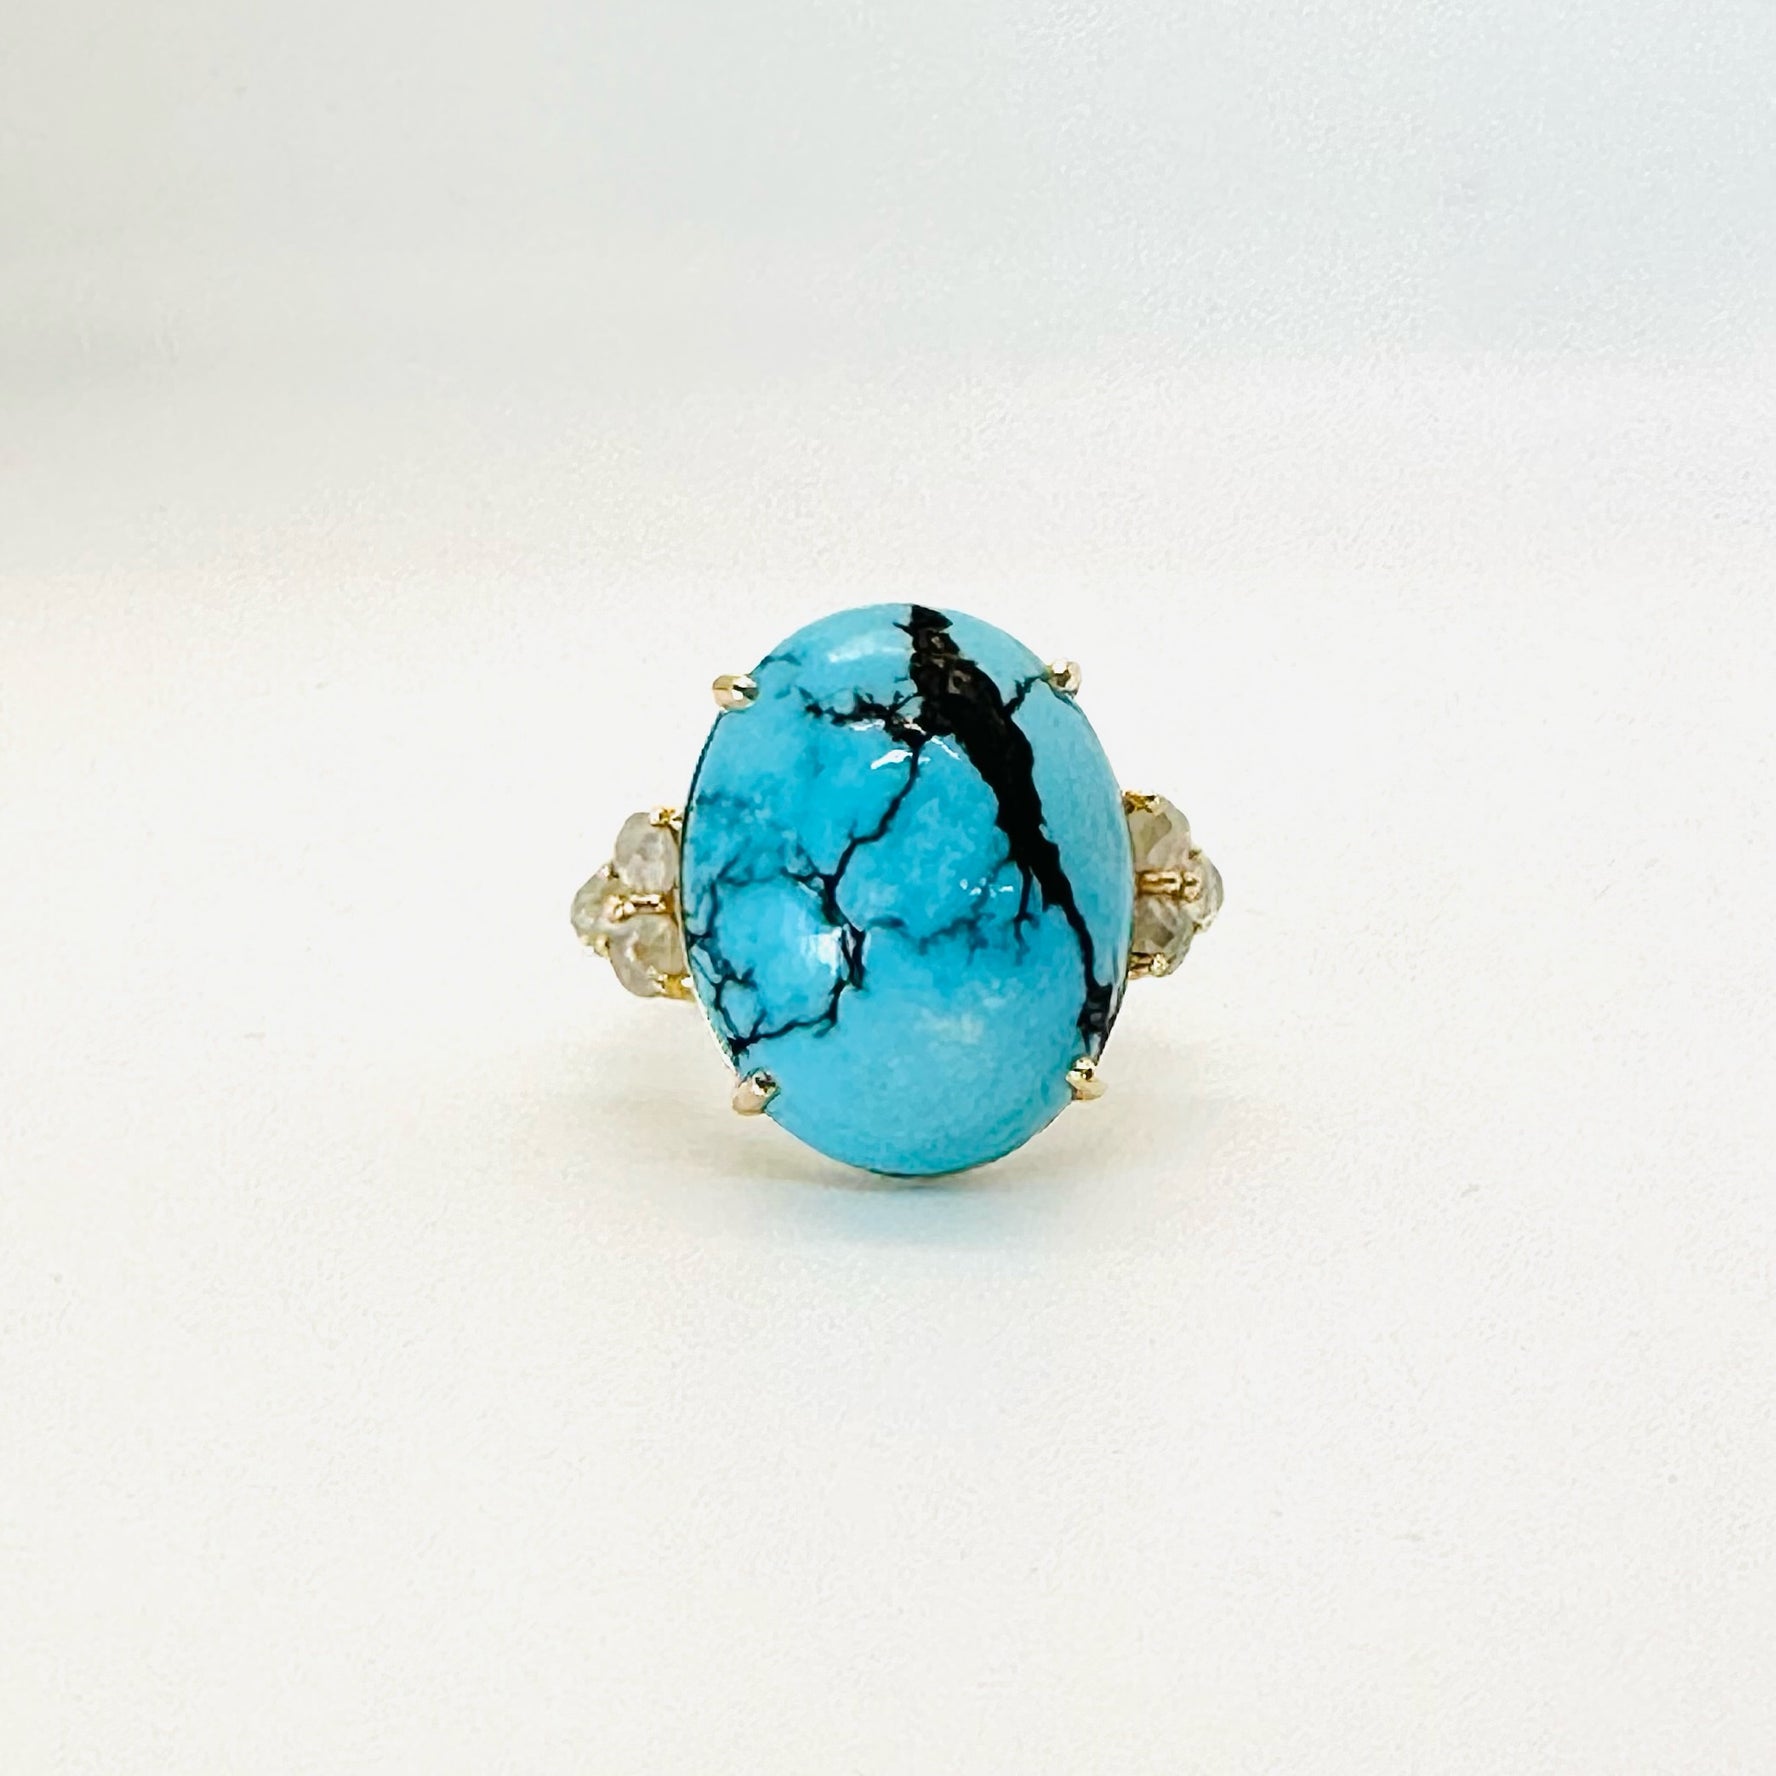 14k gold and turquoise statement ring